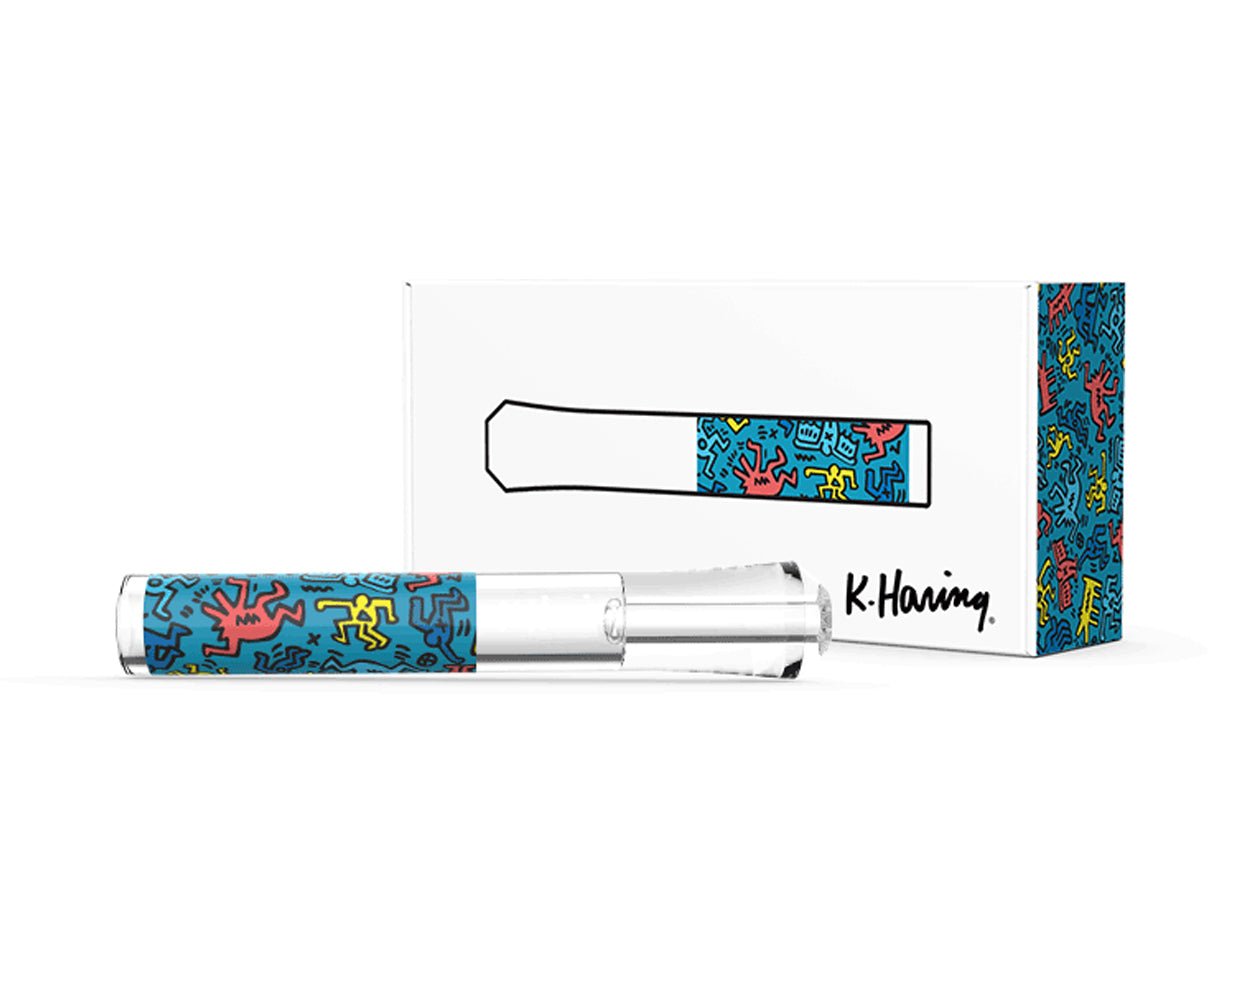 Keith Haring | Glass Taster Chillum Hand Pipe | 3in Long - Glass - Black & White - 4